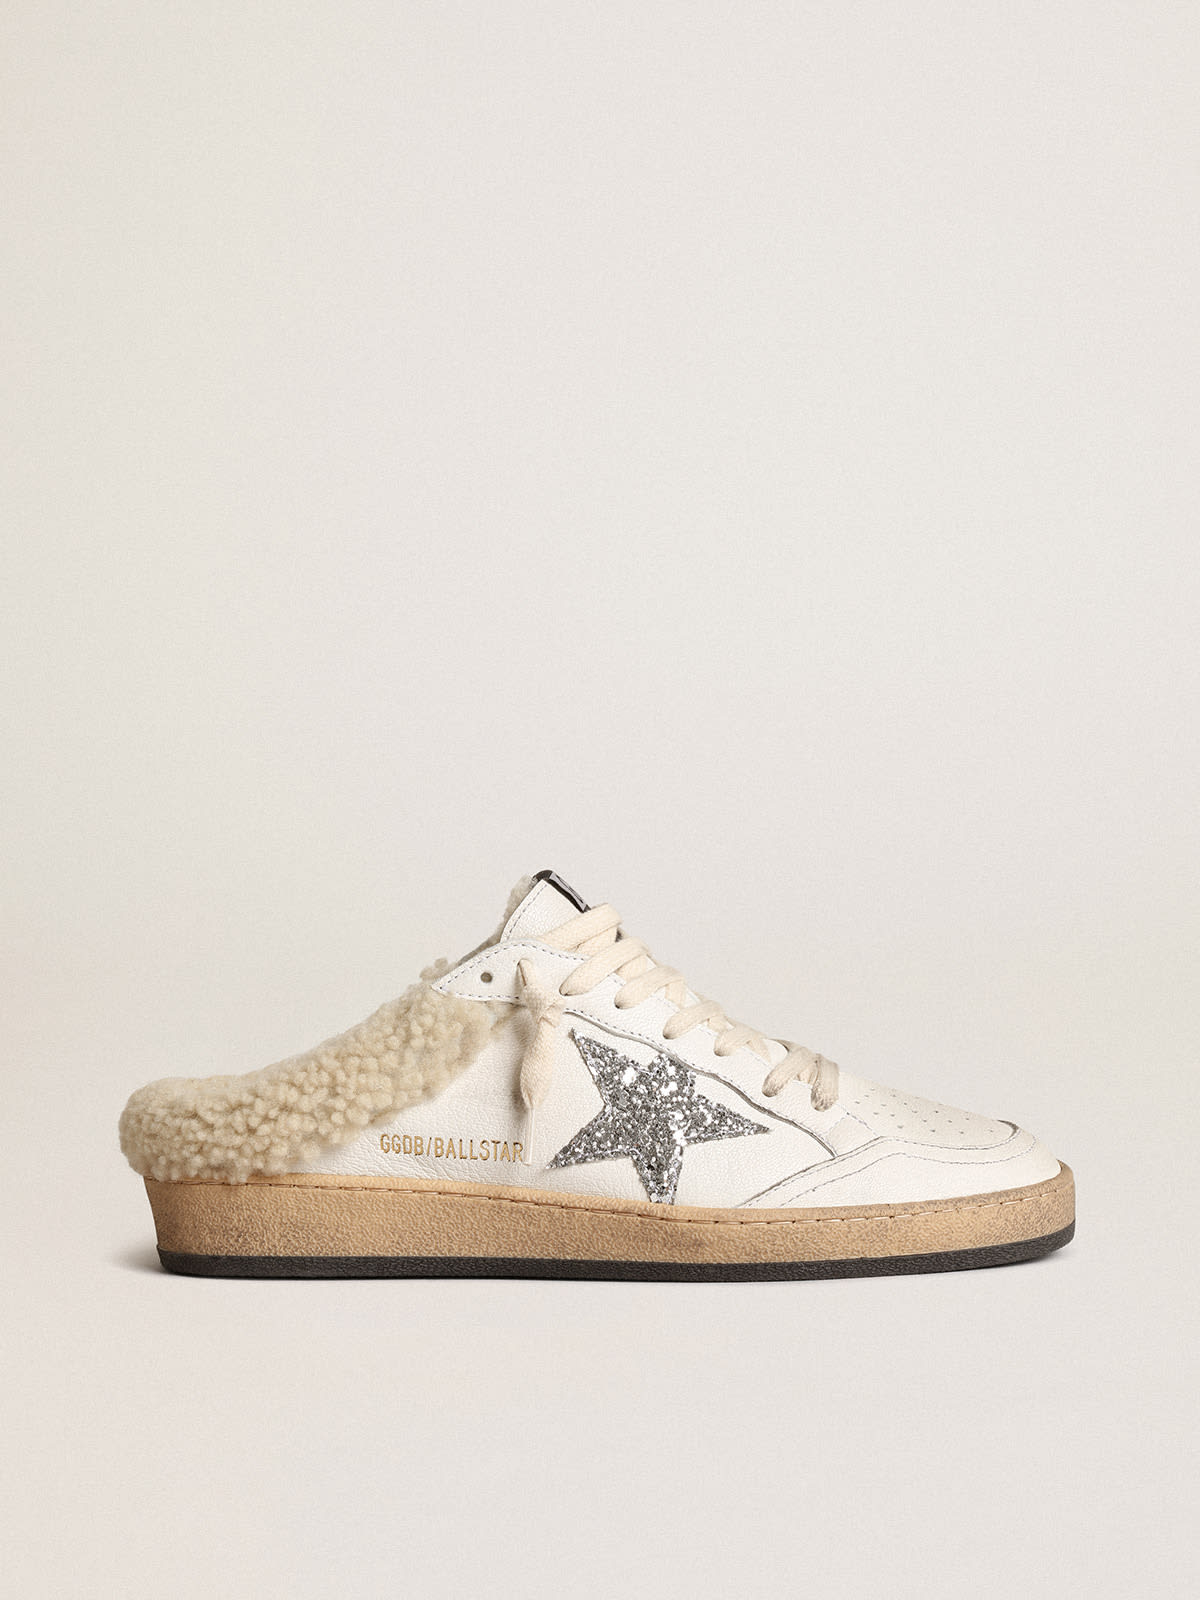 Golden Goose - Ball Star Sabots with glitter star and shearling lining in 